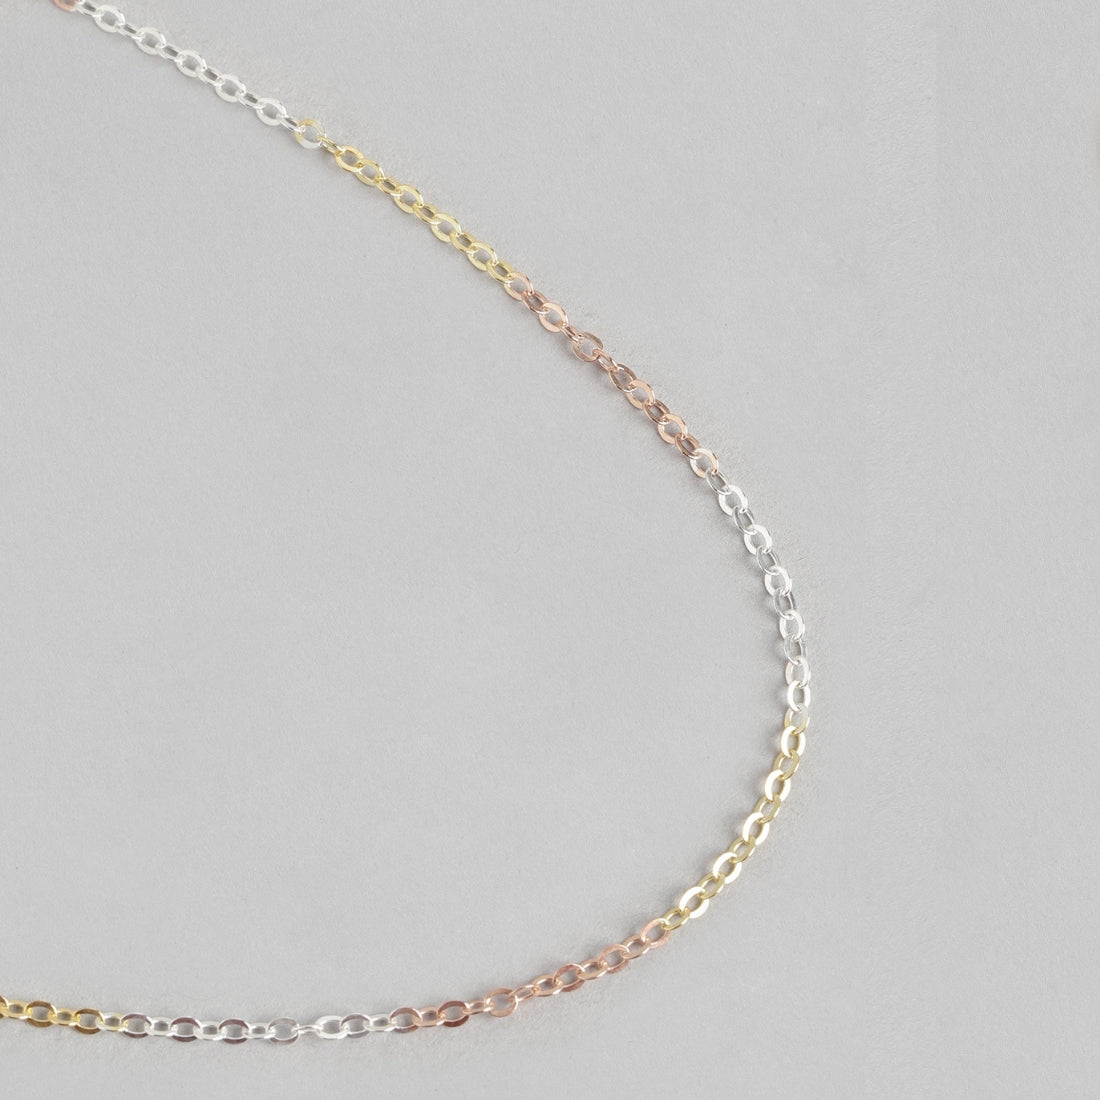 Triple Tone Classic 925 Sterling Silver Cable Chain